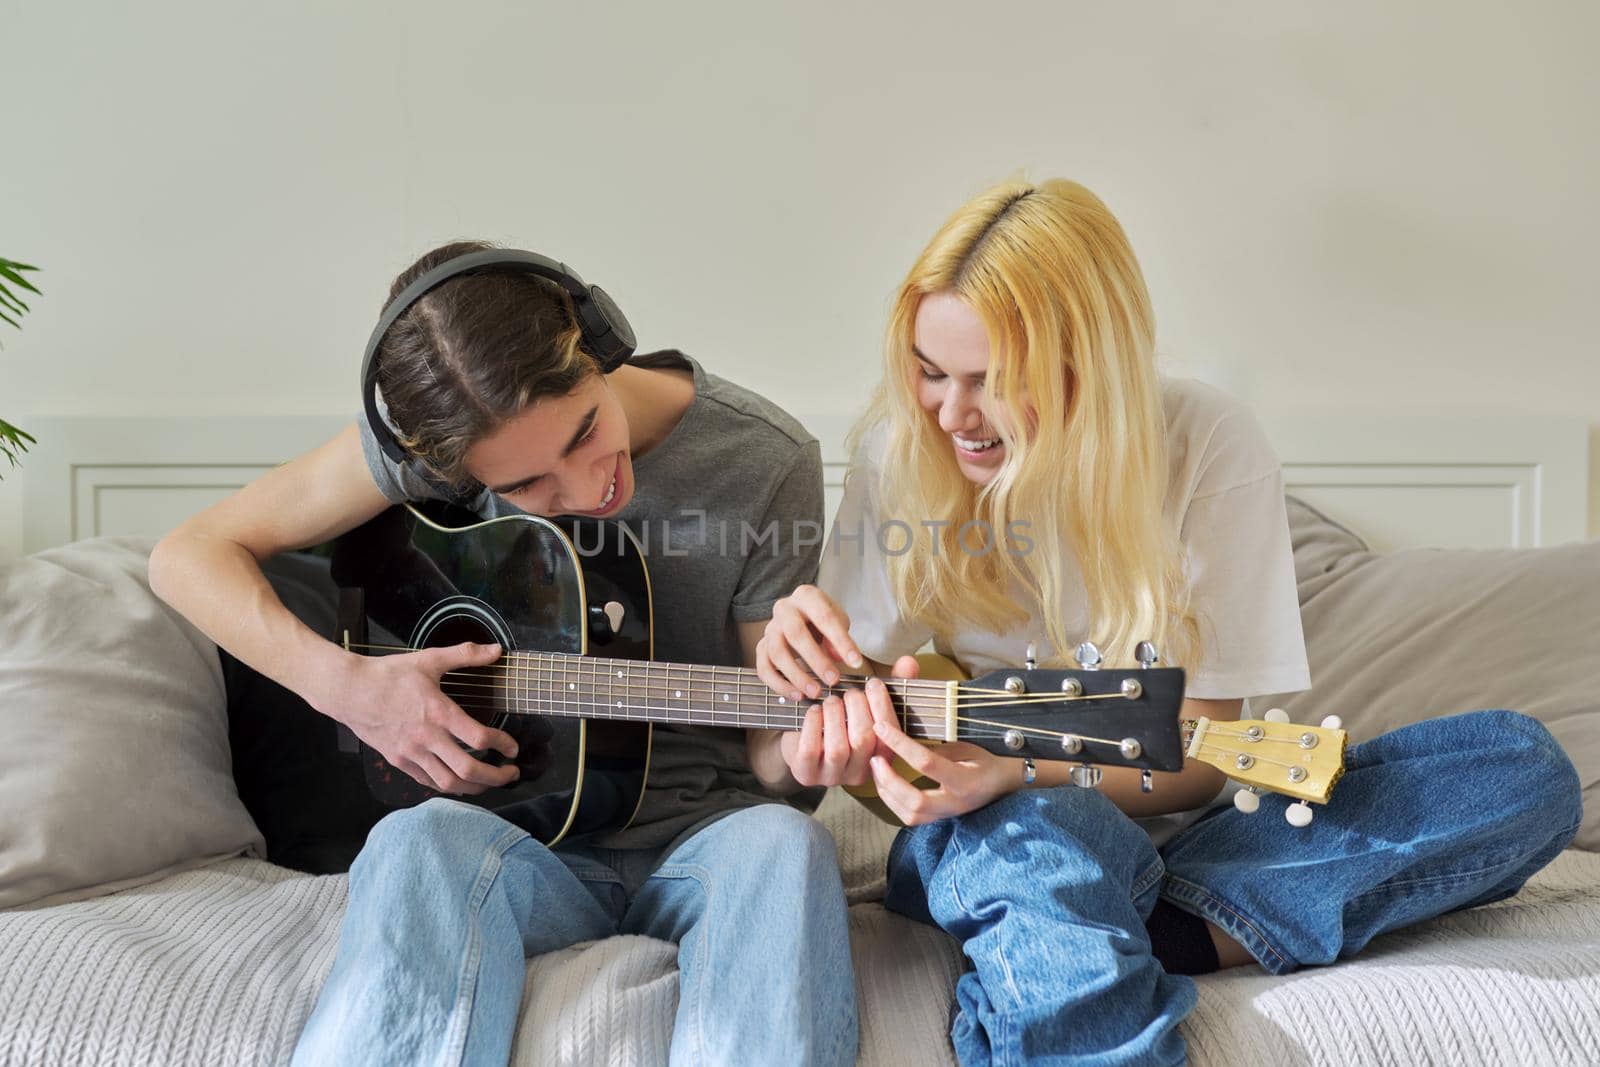 Creative couple of teenagers friends with musical instruments sitting at home on bed. Acoustic guitar and ukulele in hands of guy and girl. Hobby, music, friendship, creativity, youth concept